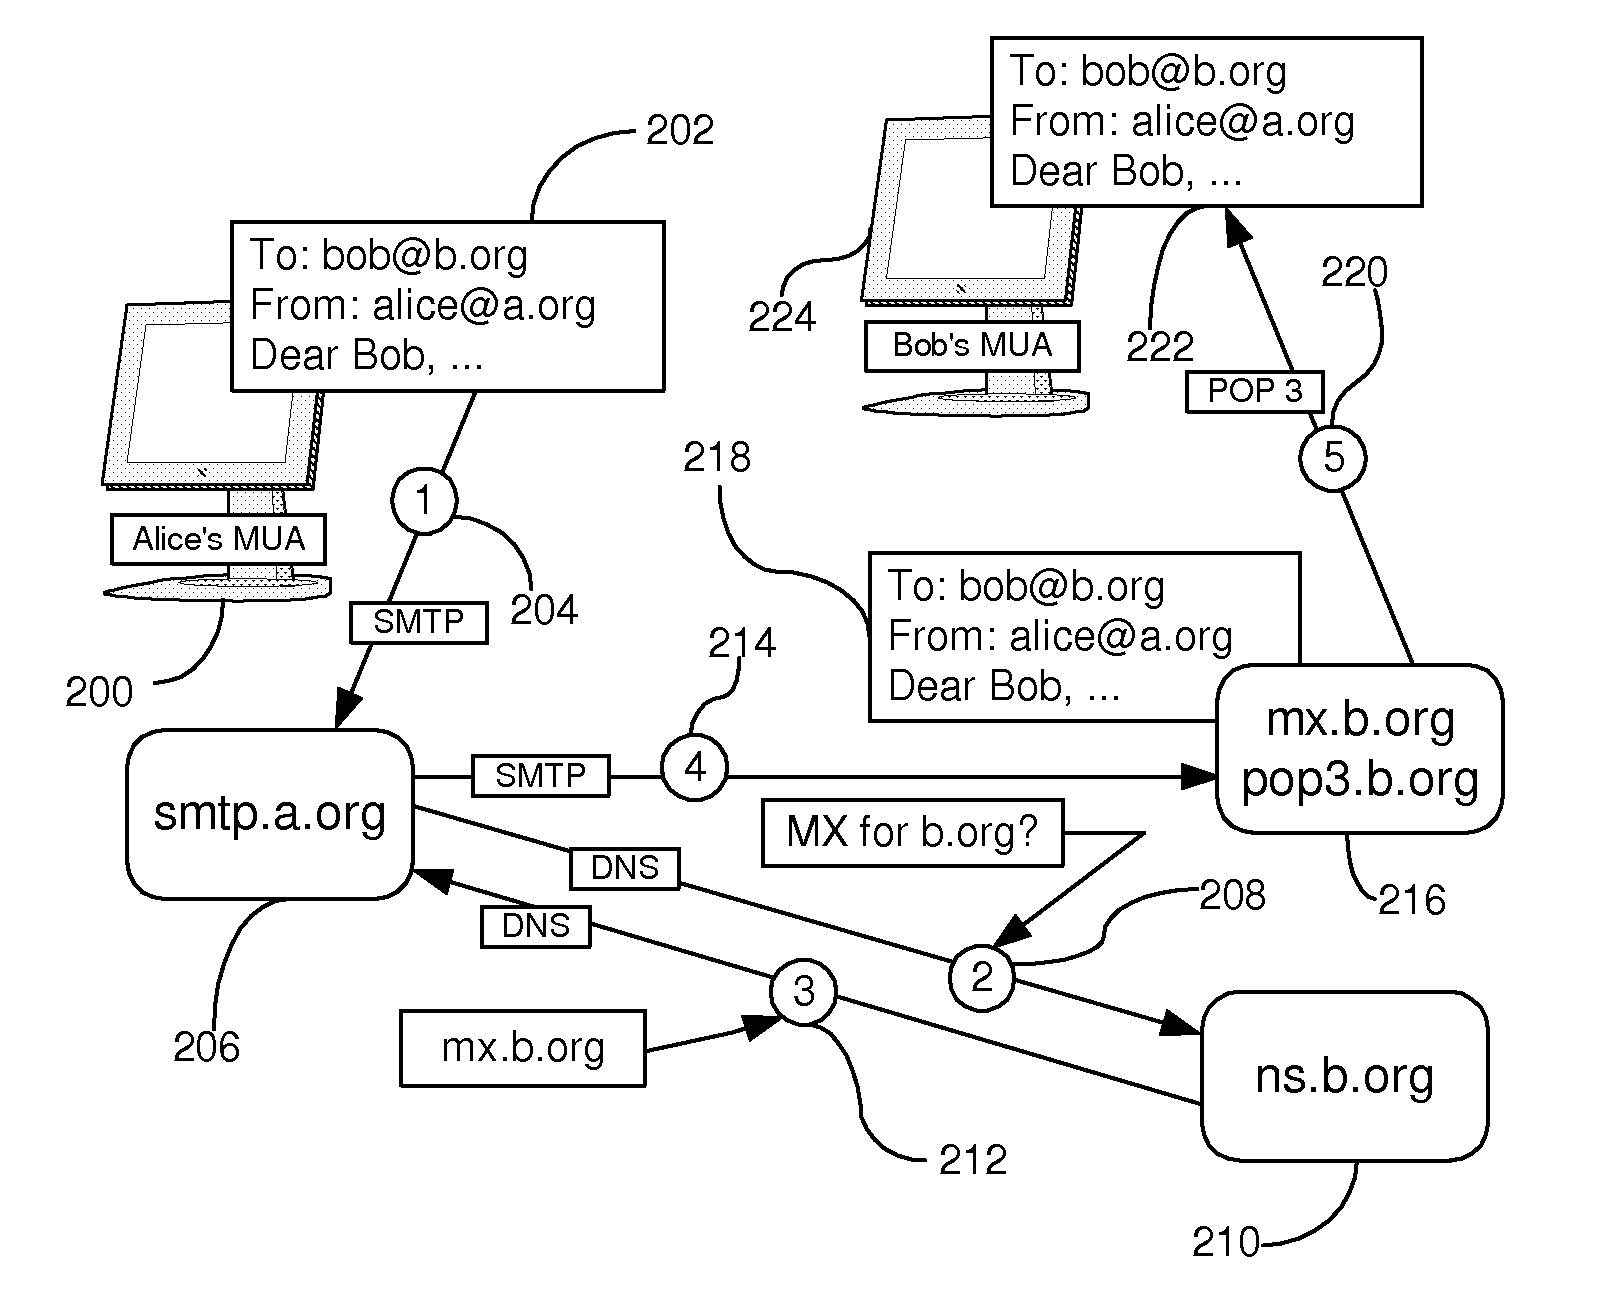 Virtual email method for preventing delivery of unsolicited and undesired electronic messages